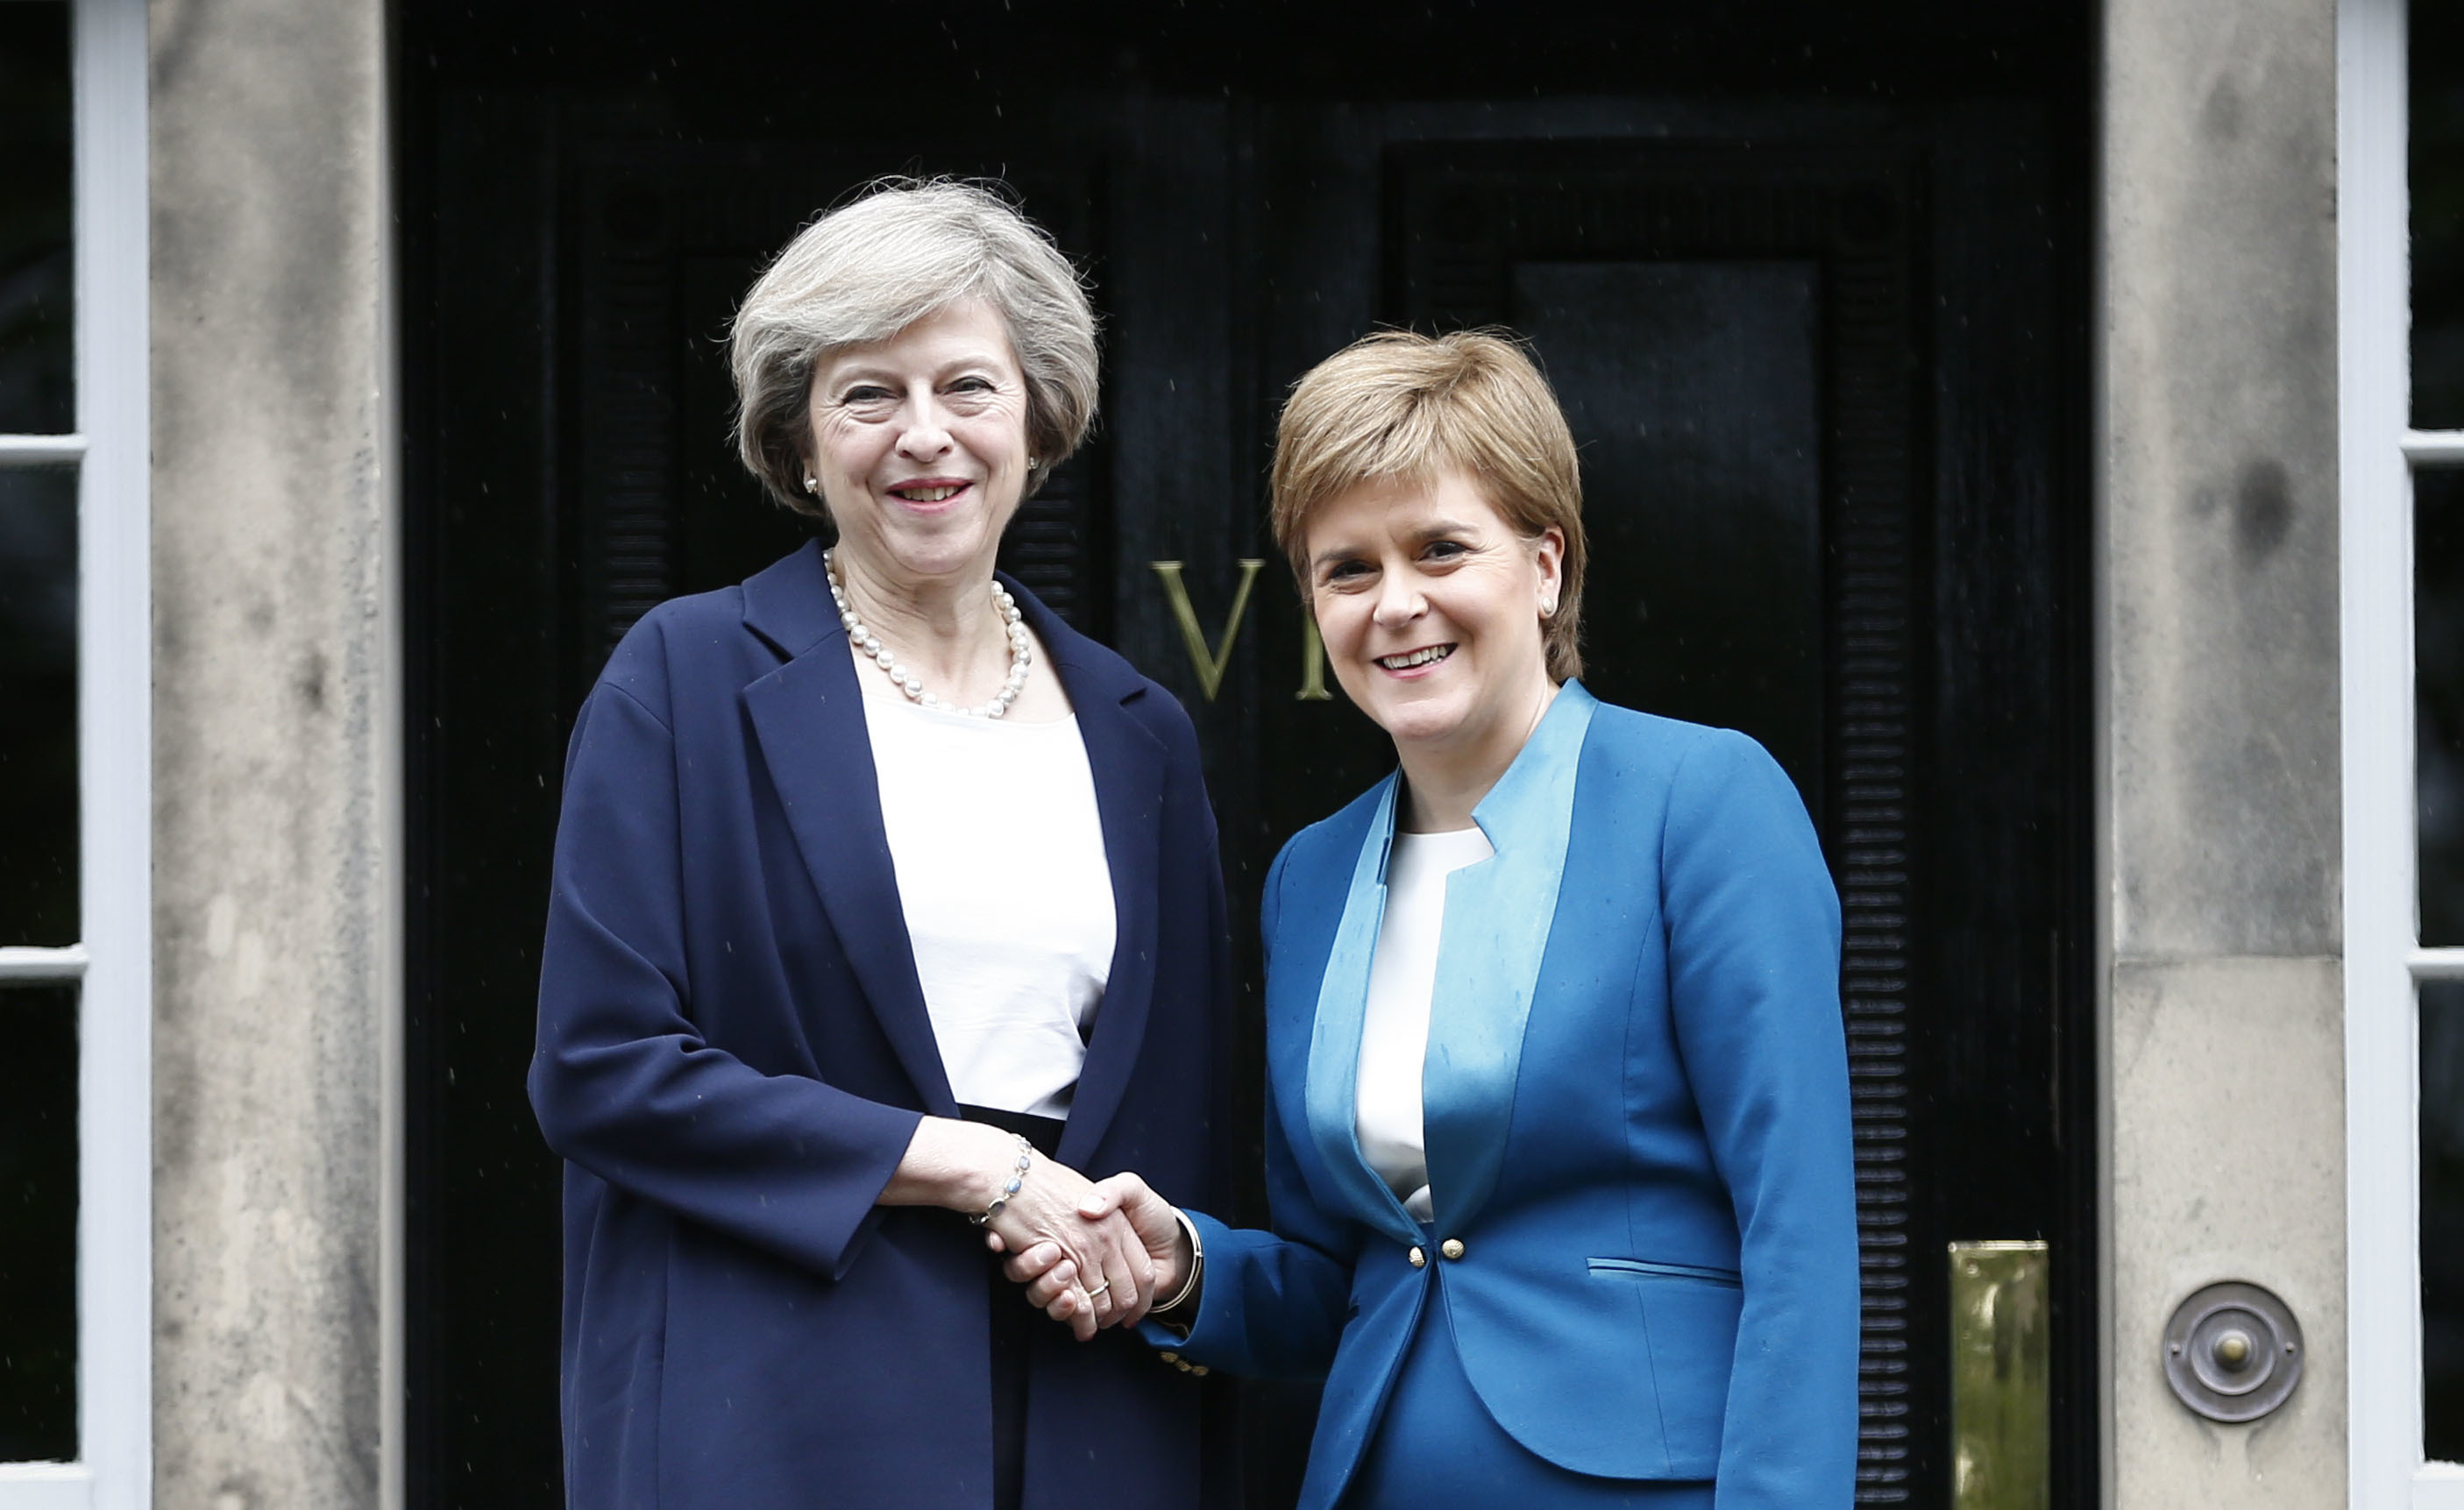 Prime Minister Theresa May and First Minister Nicola Sturgeon on the steps of Bute House.